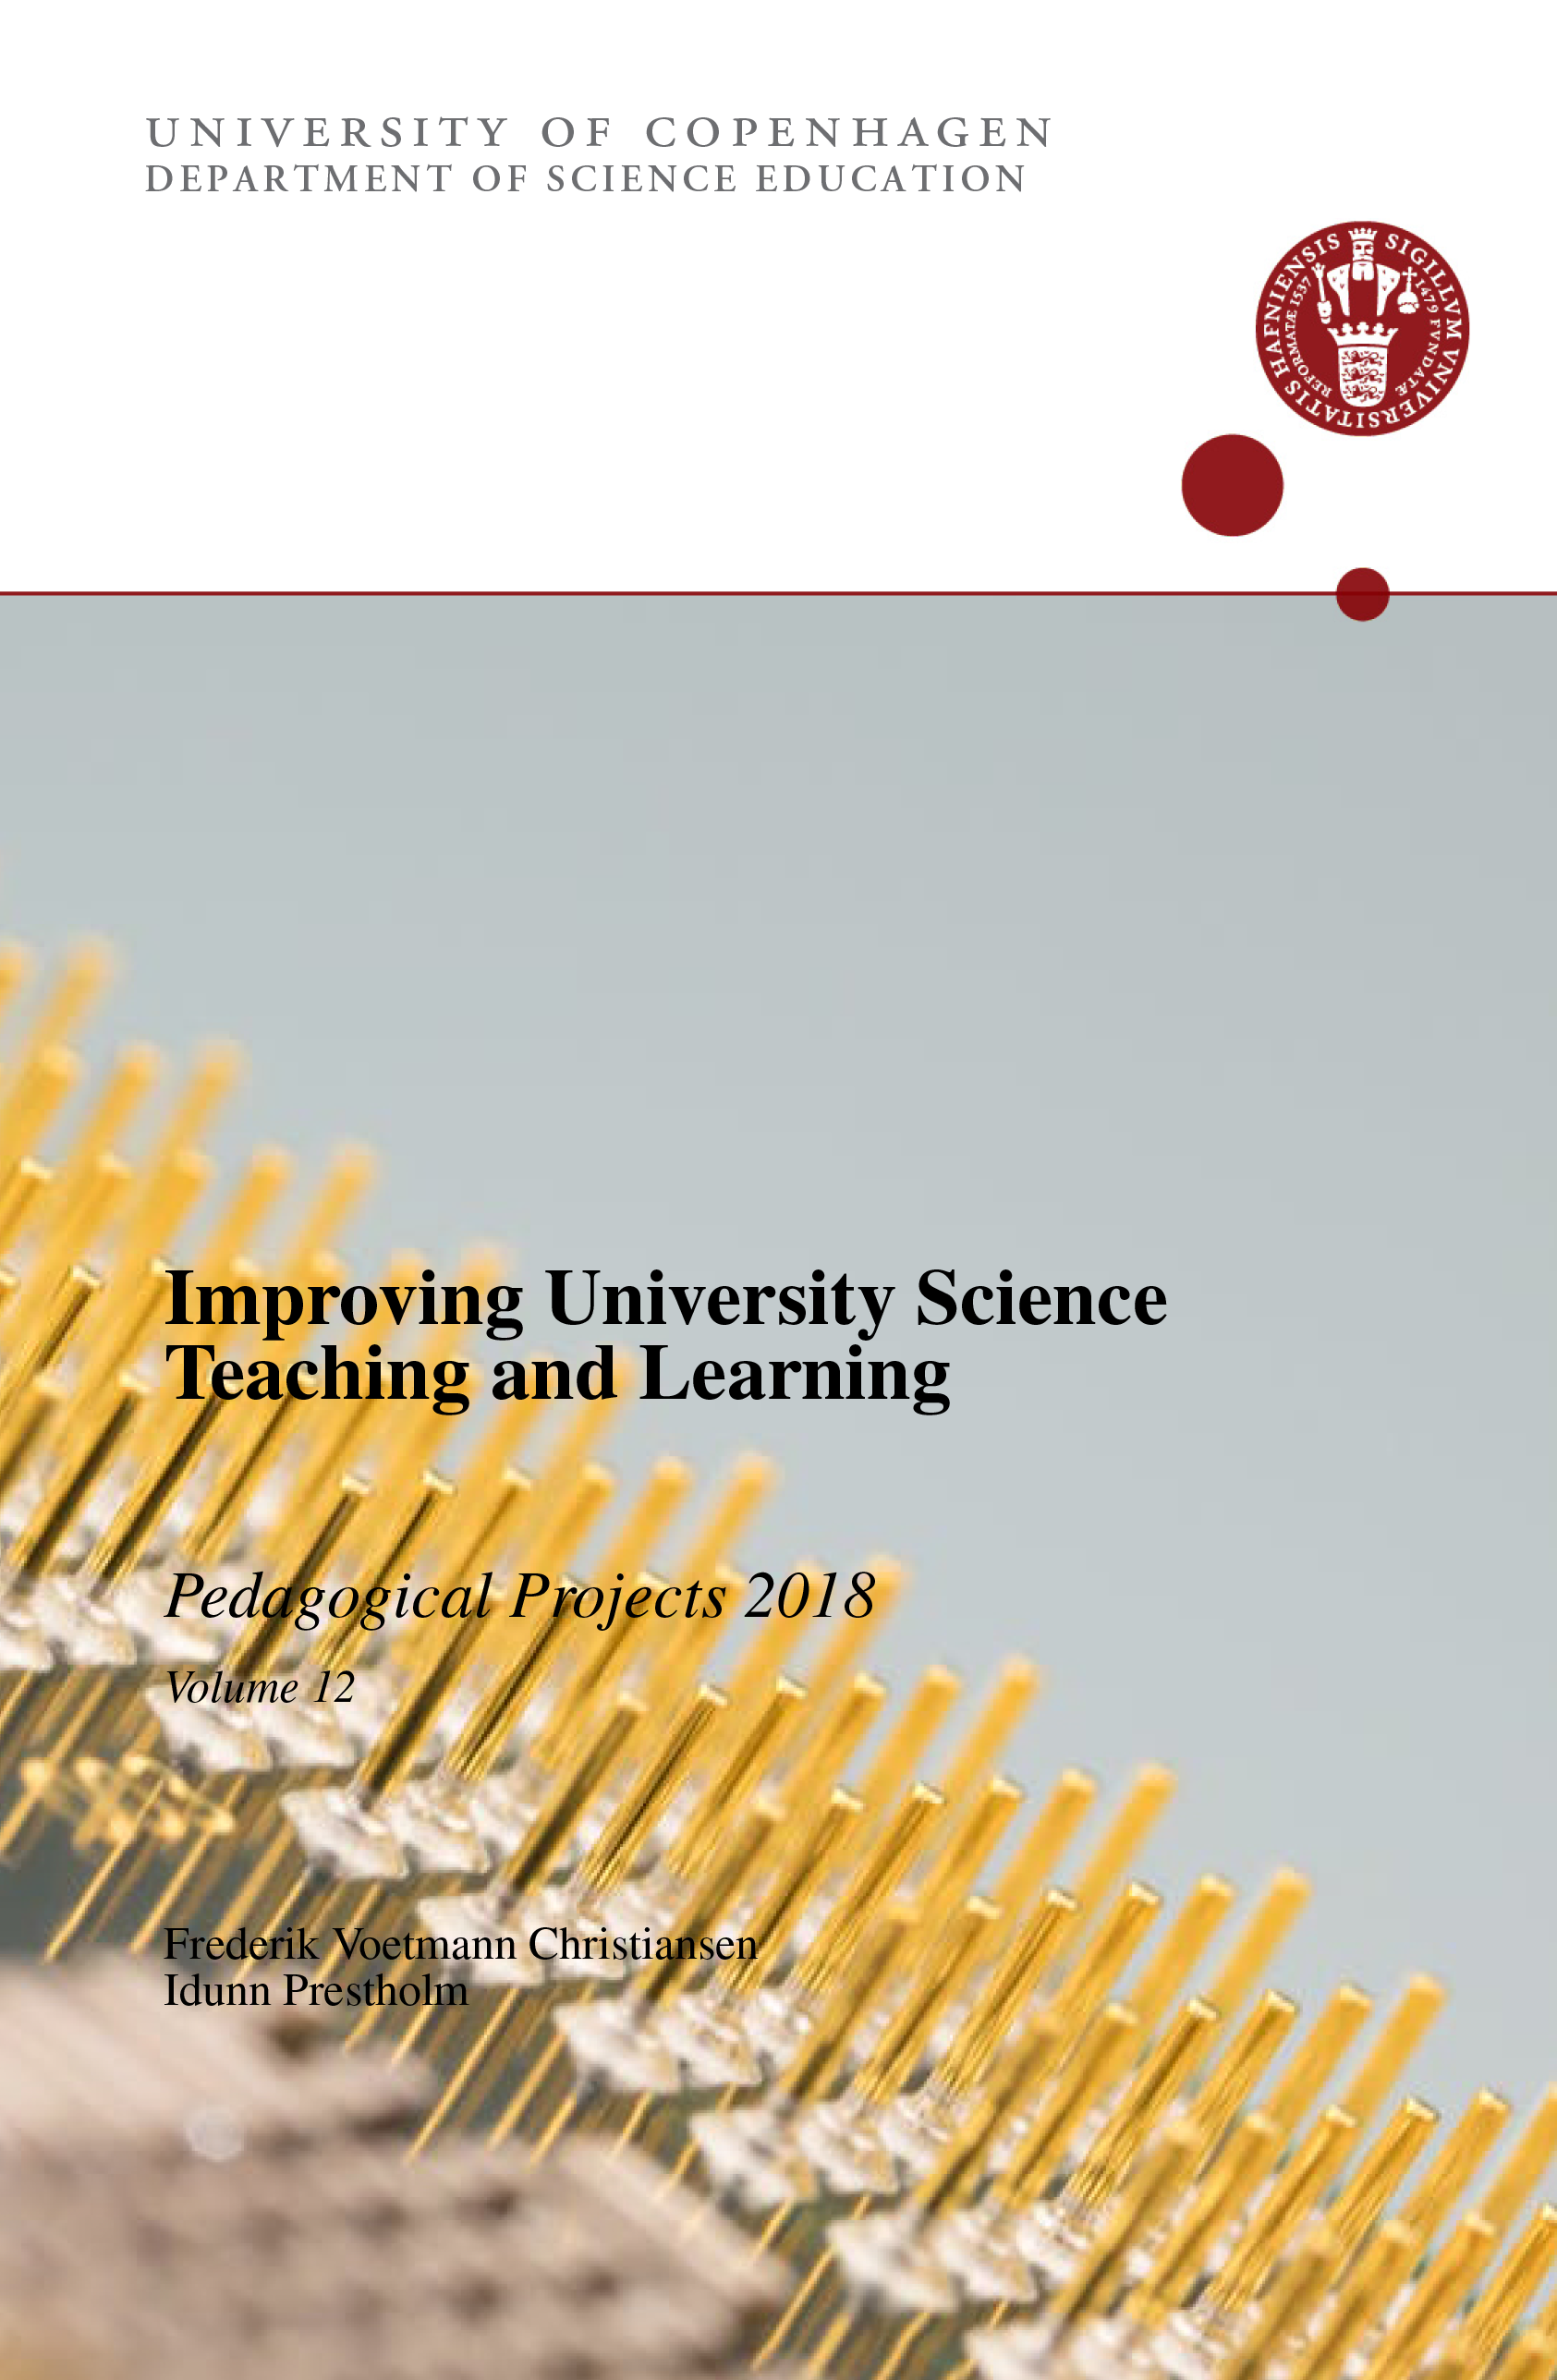 					Se Årg. 12 Nr. 1 (2018):  Improving University Science Teaching and Learning - Pedagogical Projects 2018
				